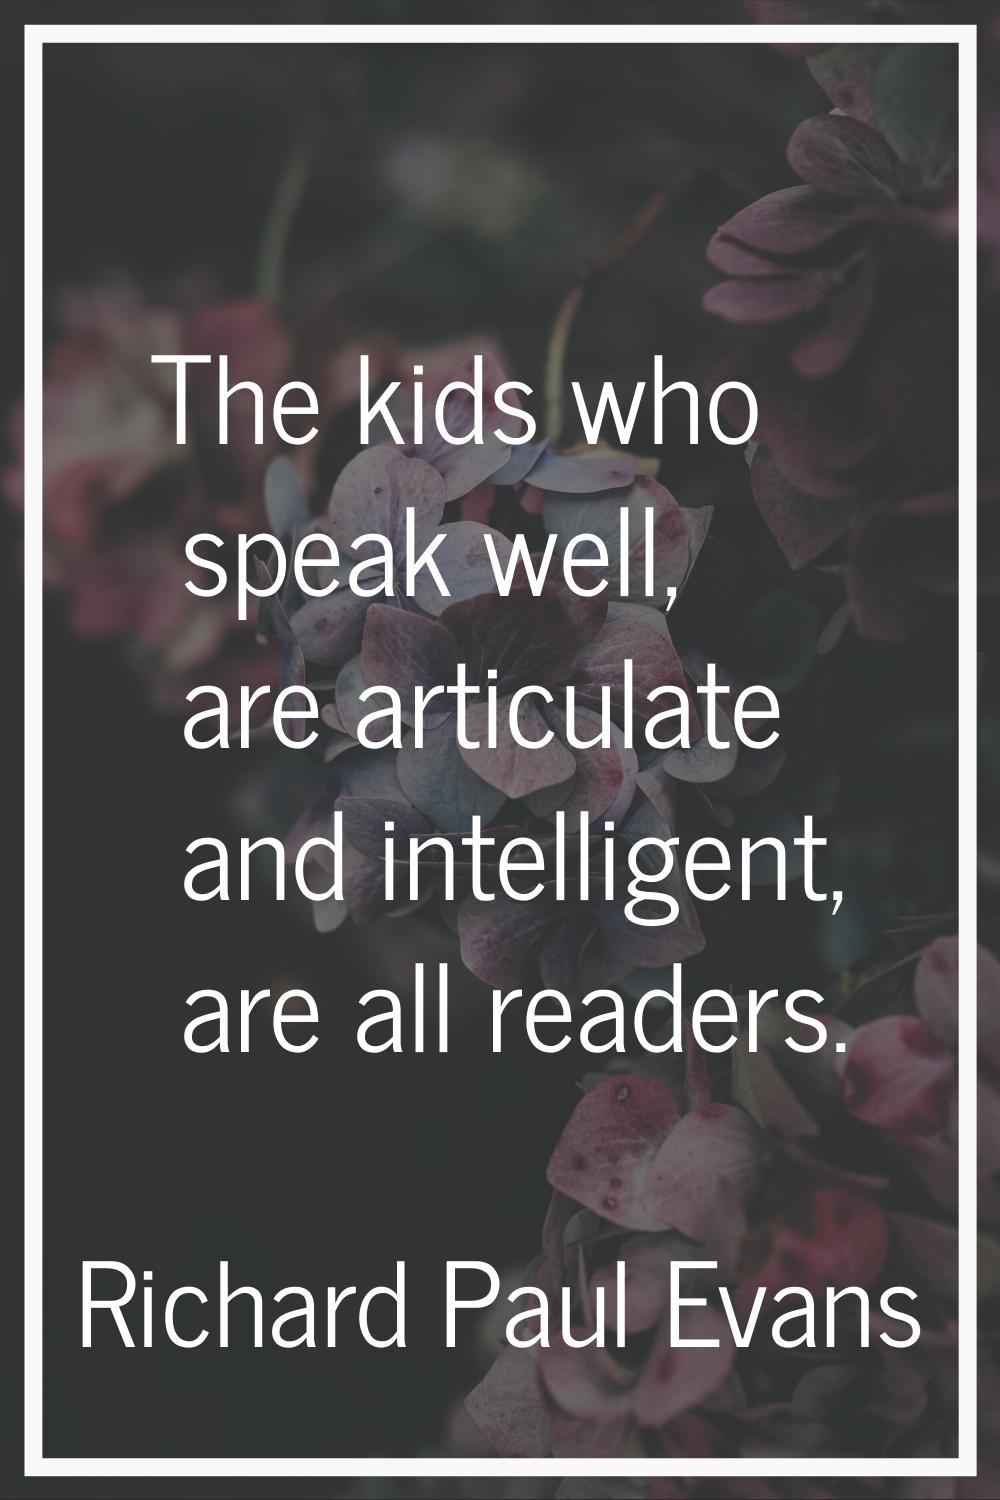 The kids who speak well, are articulate and intelligent, are all readers.